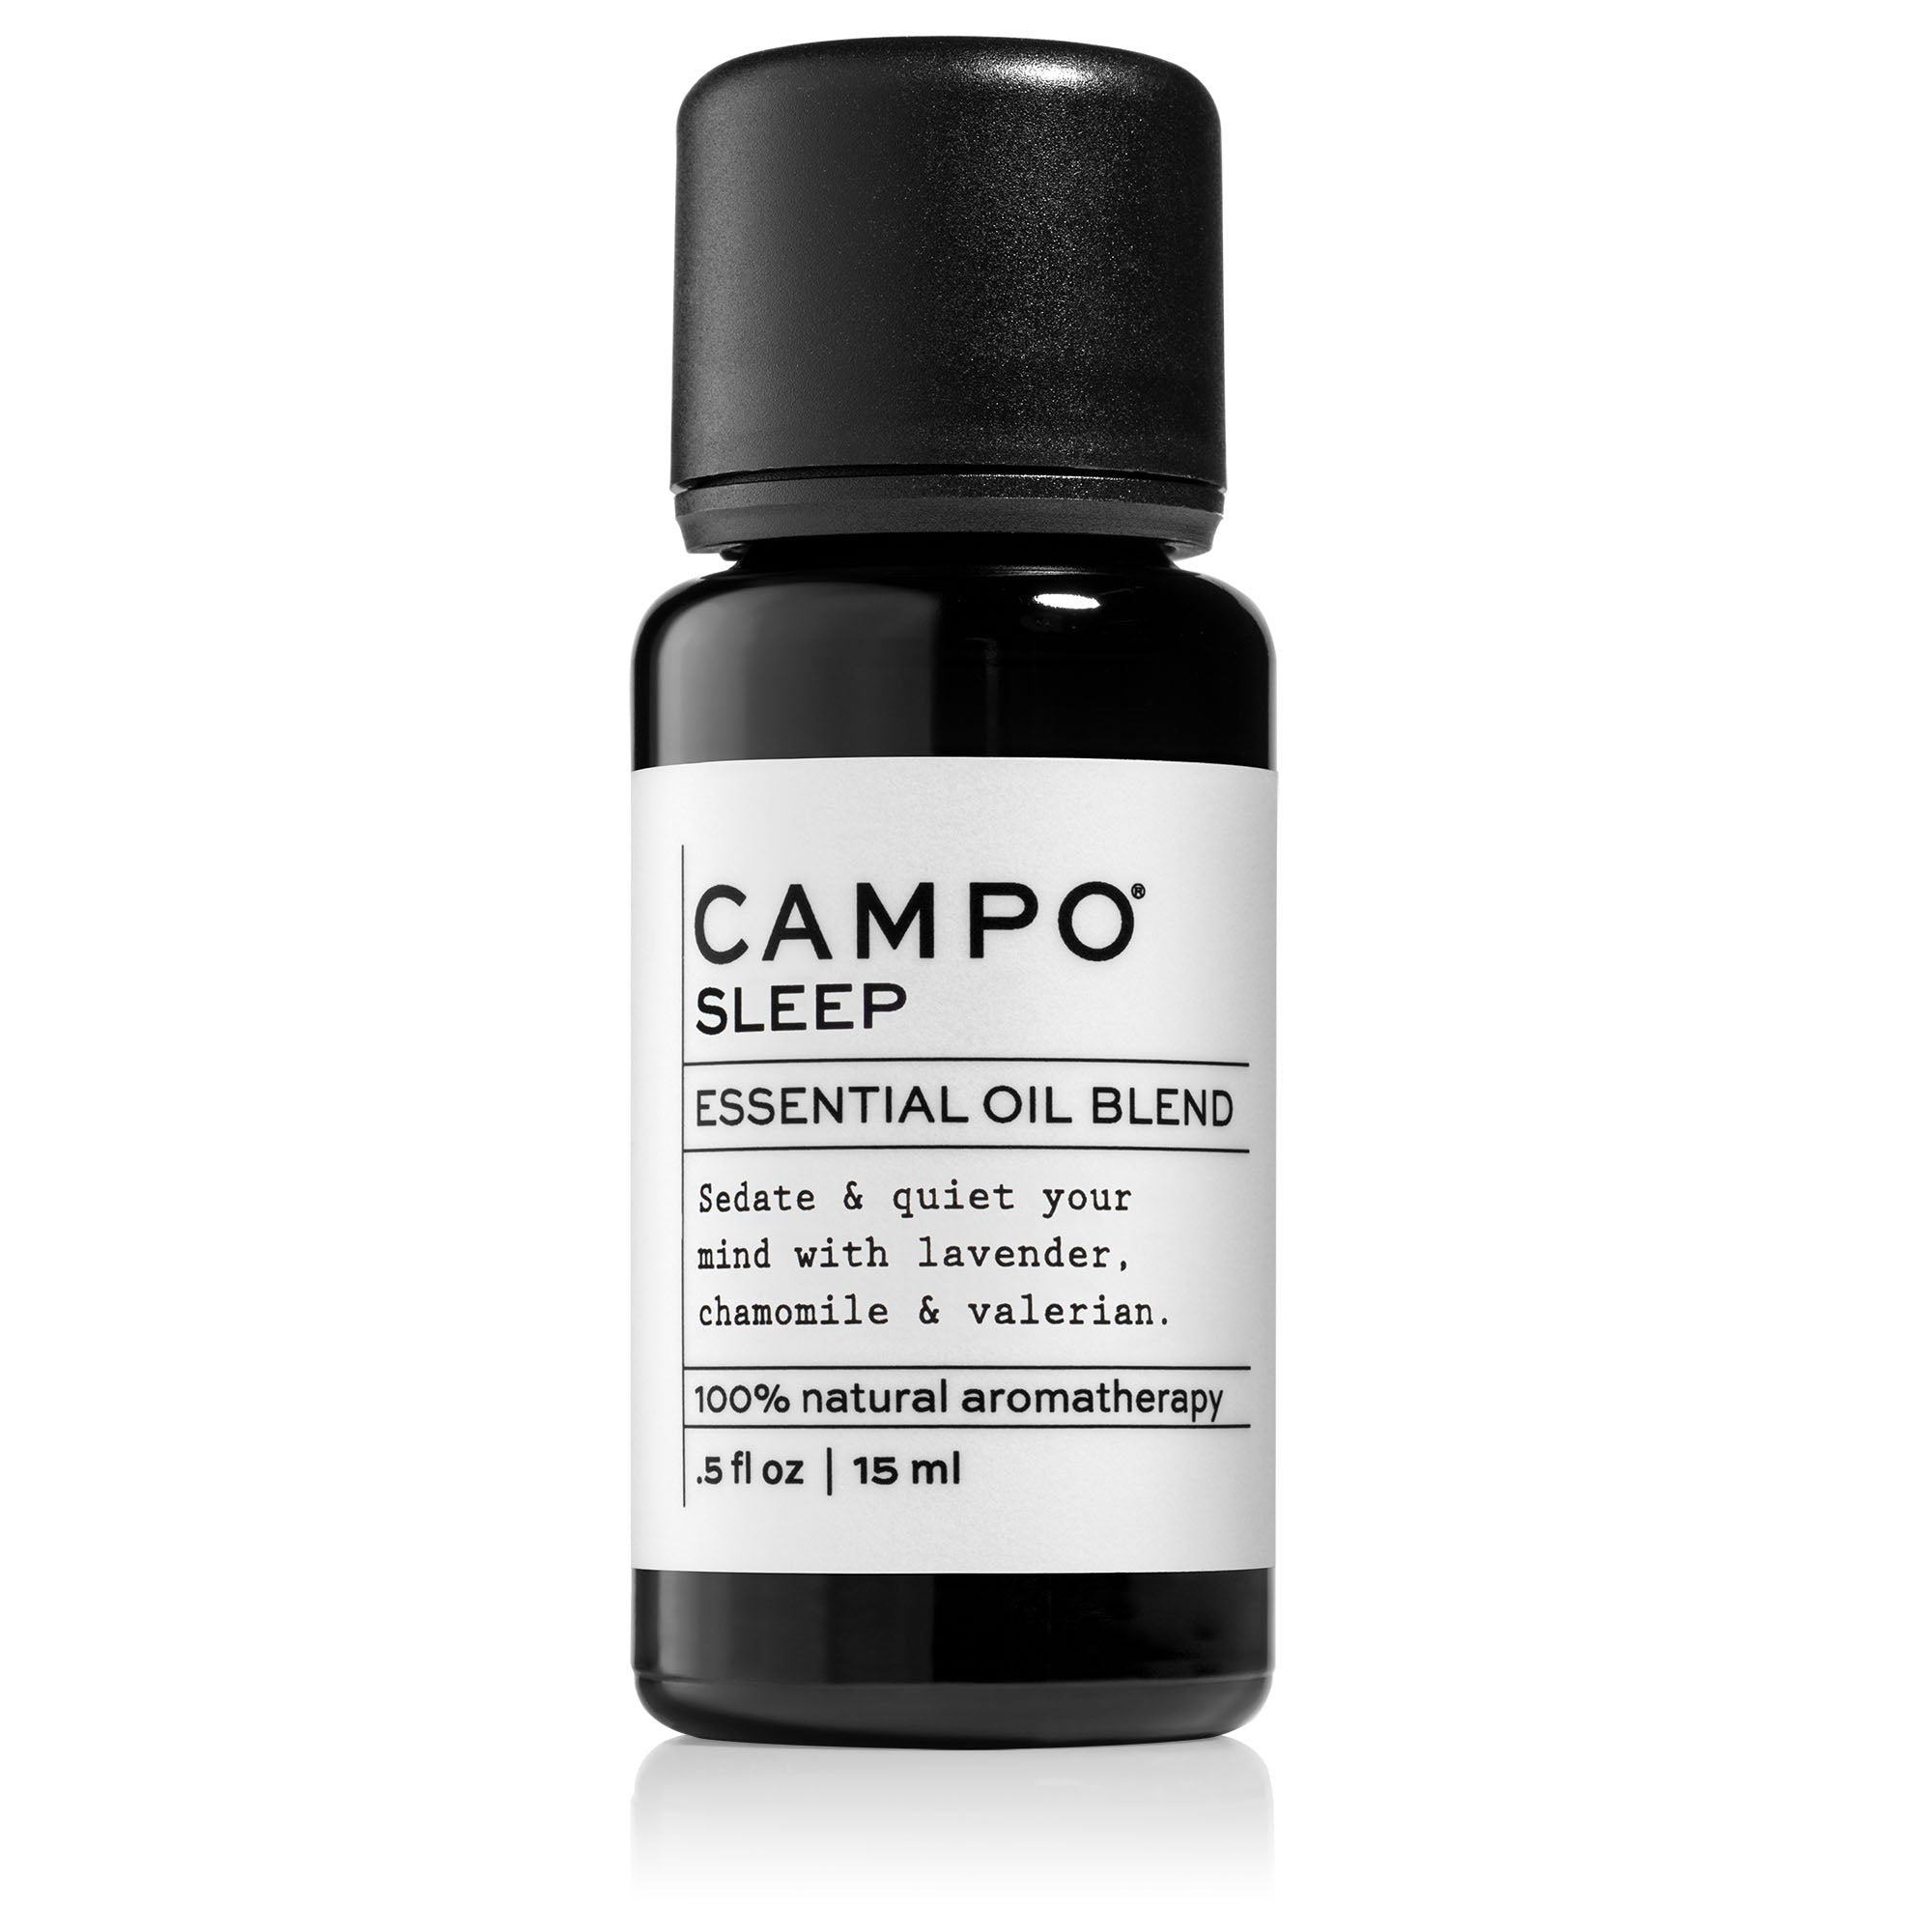 Campo Beauty SLEEP Blend 15 ml Essential Oil. Calm & quiet your mind naturally with this 100% pure essential oil blend of French Lavender, Wild Palmarosa, Roman Chamomile, and Valerian Root.